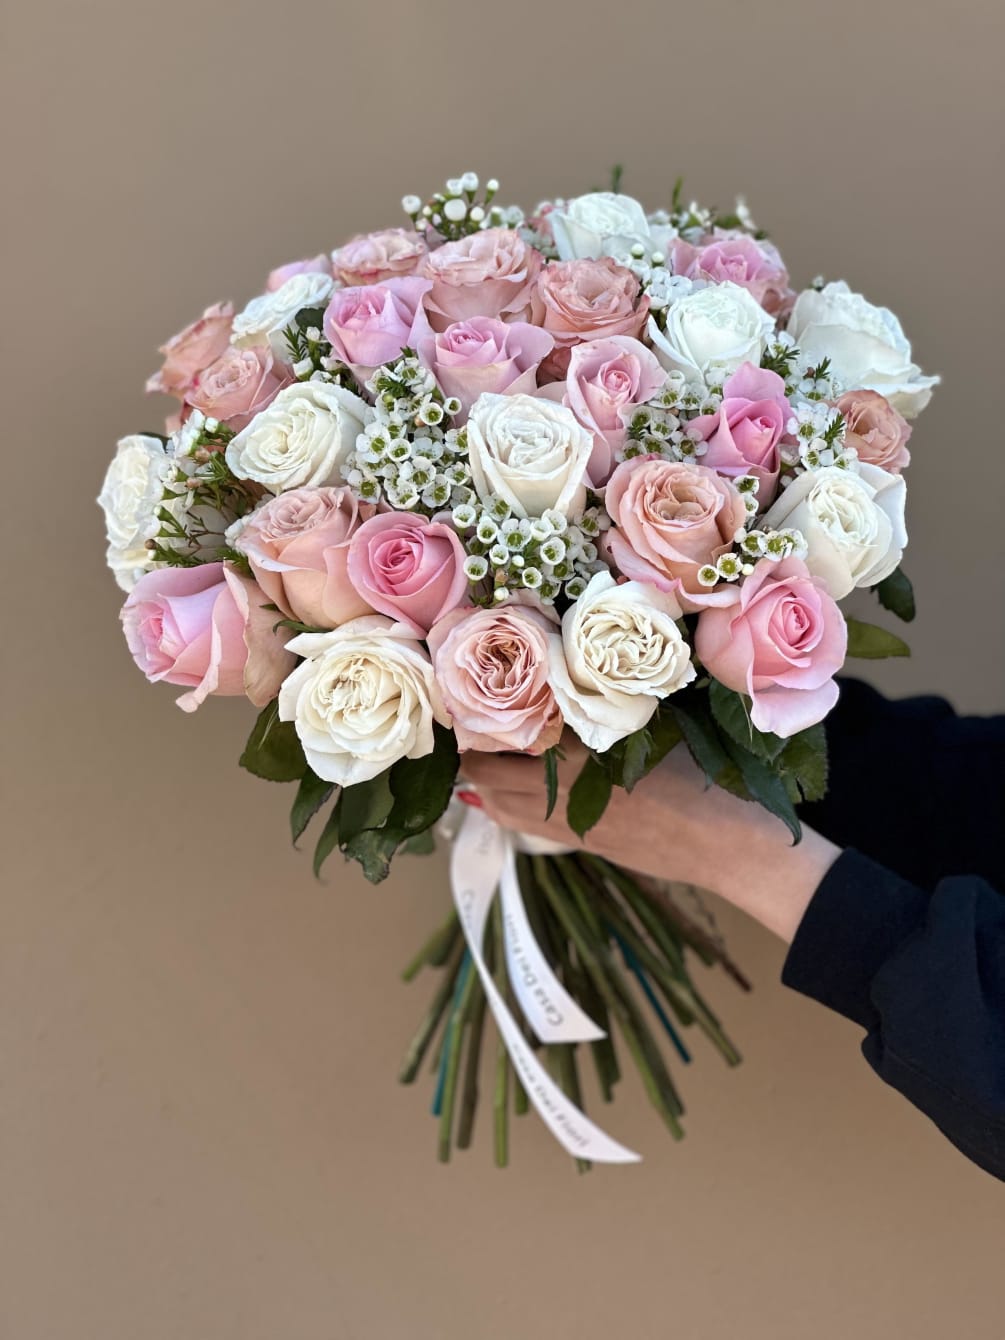 Mix of roses (Shimmer, Playa Blanca and Novia)  arranged in a